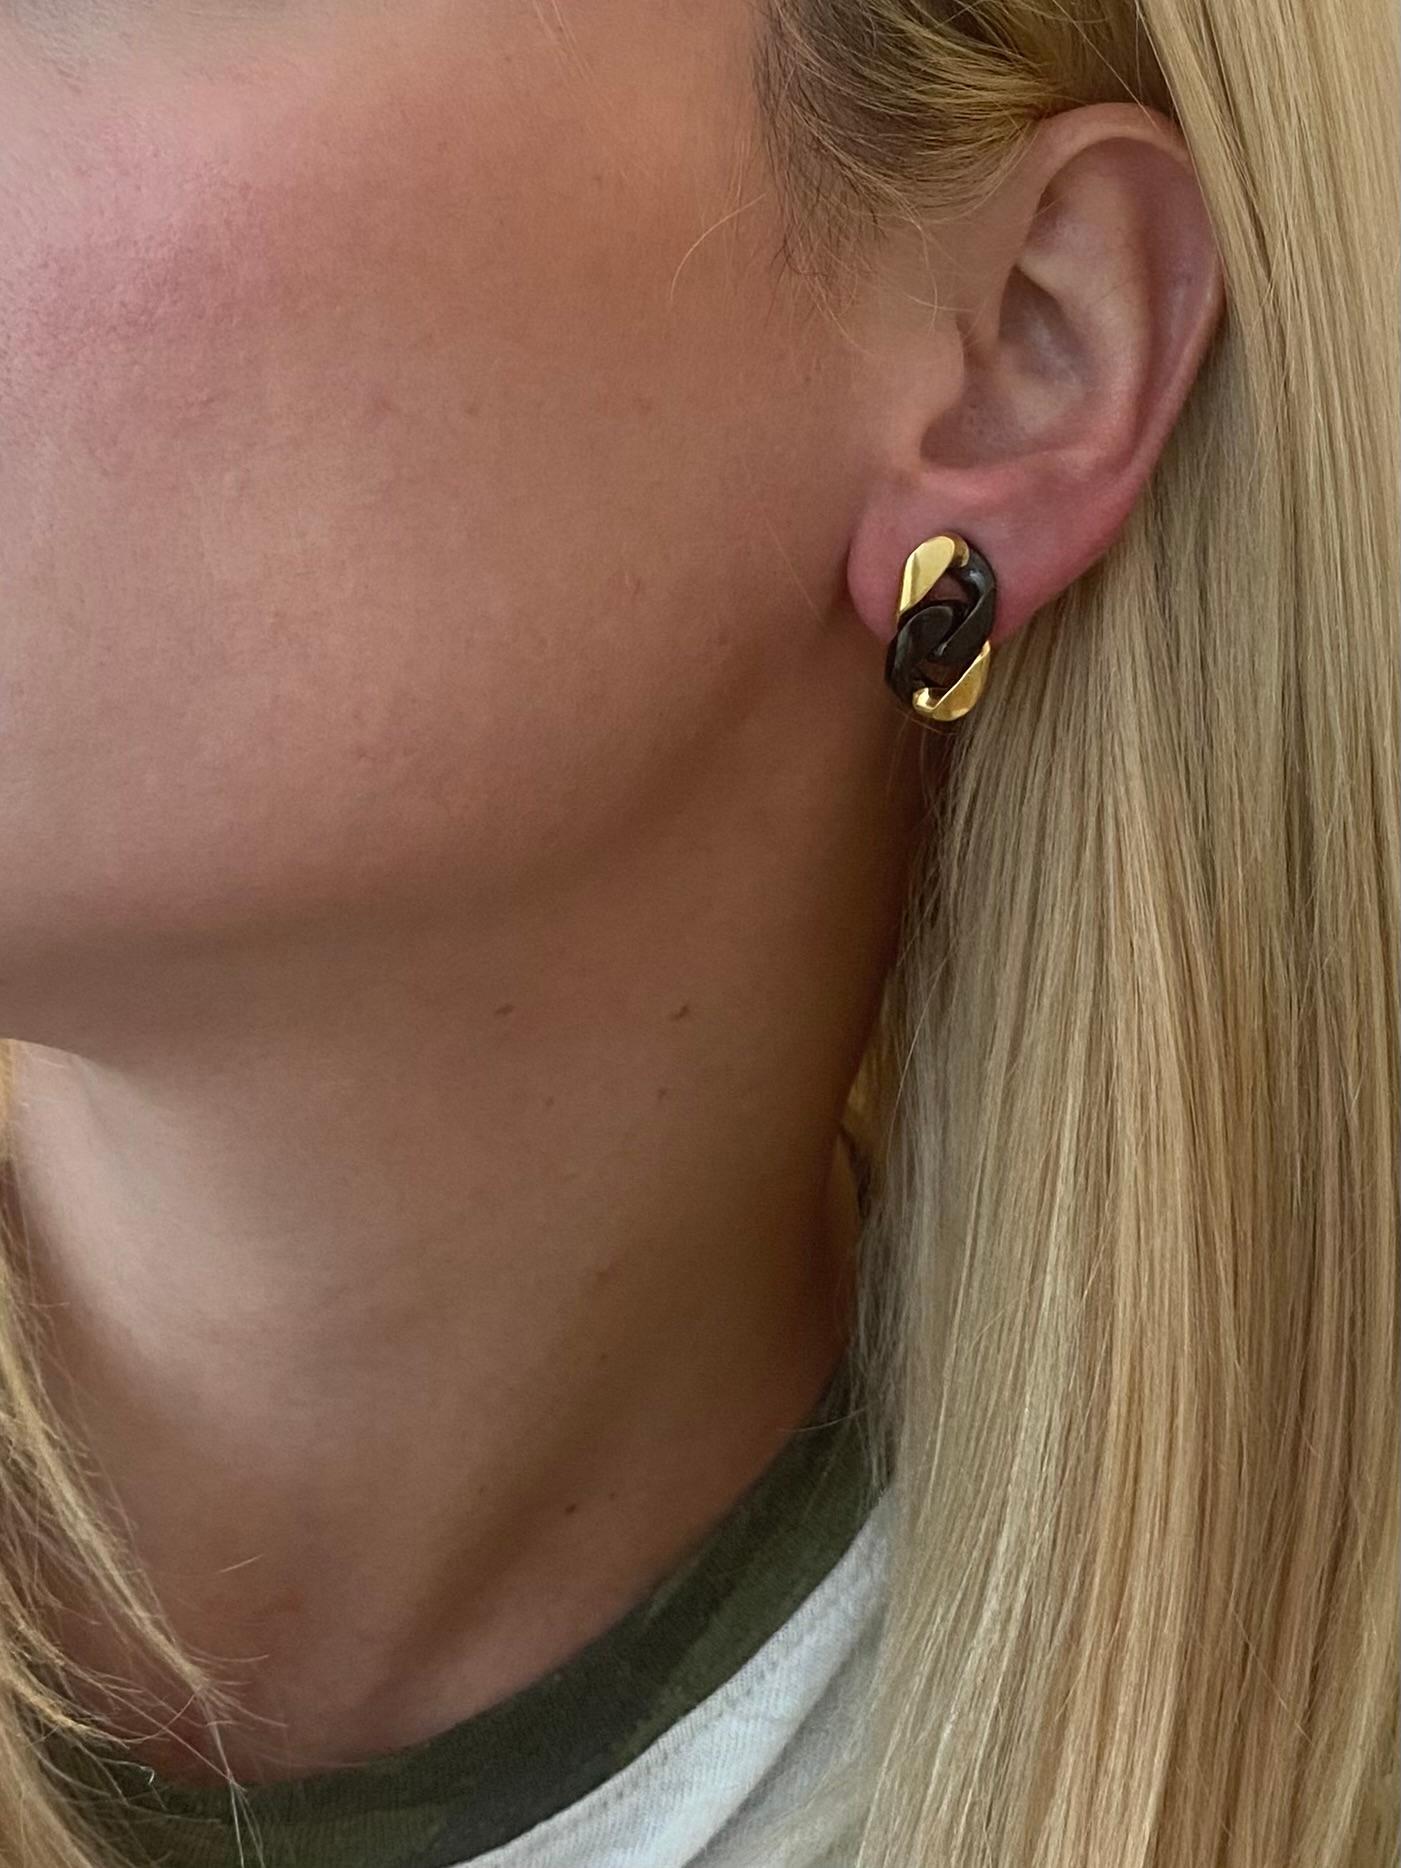 Pair of earrings designed by Paolo & Amedeo Bottoli.

Beautiful contemporary pair, made in Verona Italy by the Bottoli brothers. This pair of clips-earrings has been crafted in solid yellow and blackened gold of 18 karats. Suited with comfortable